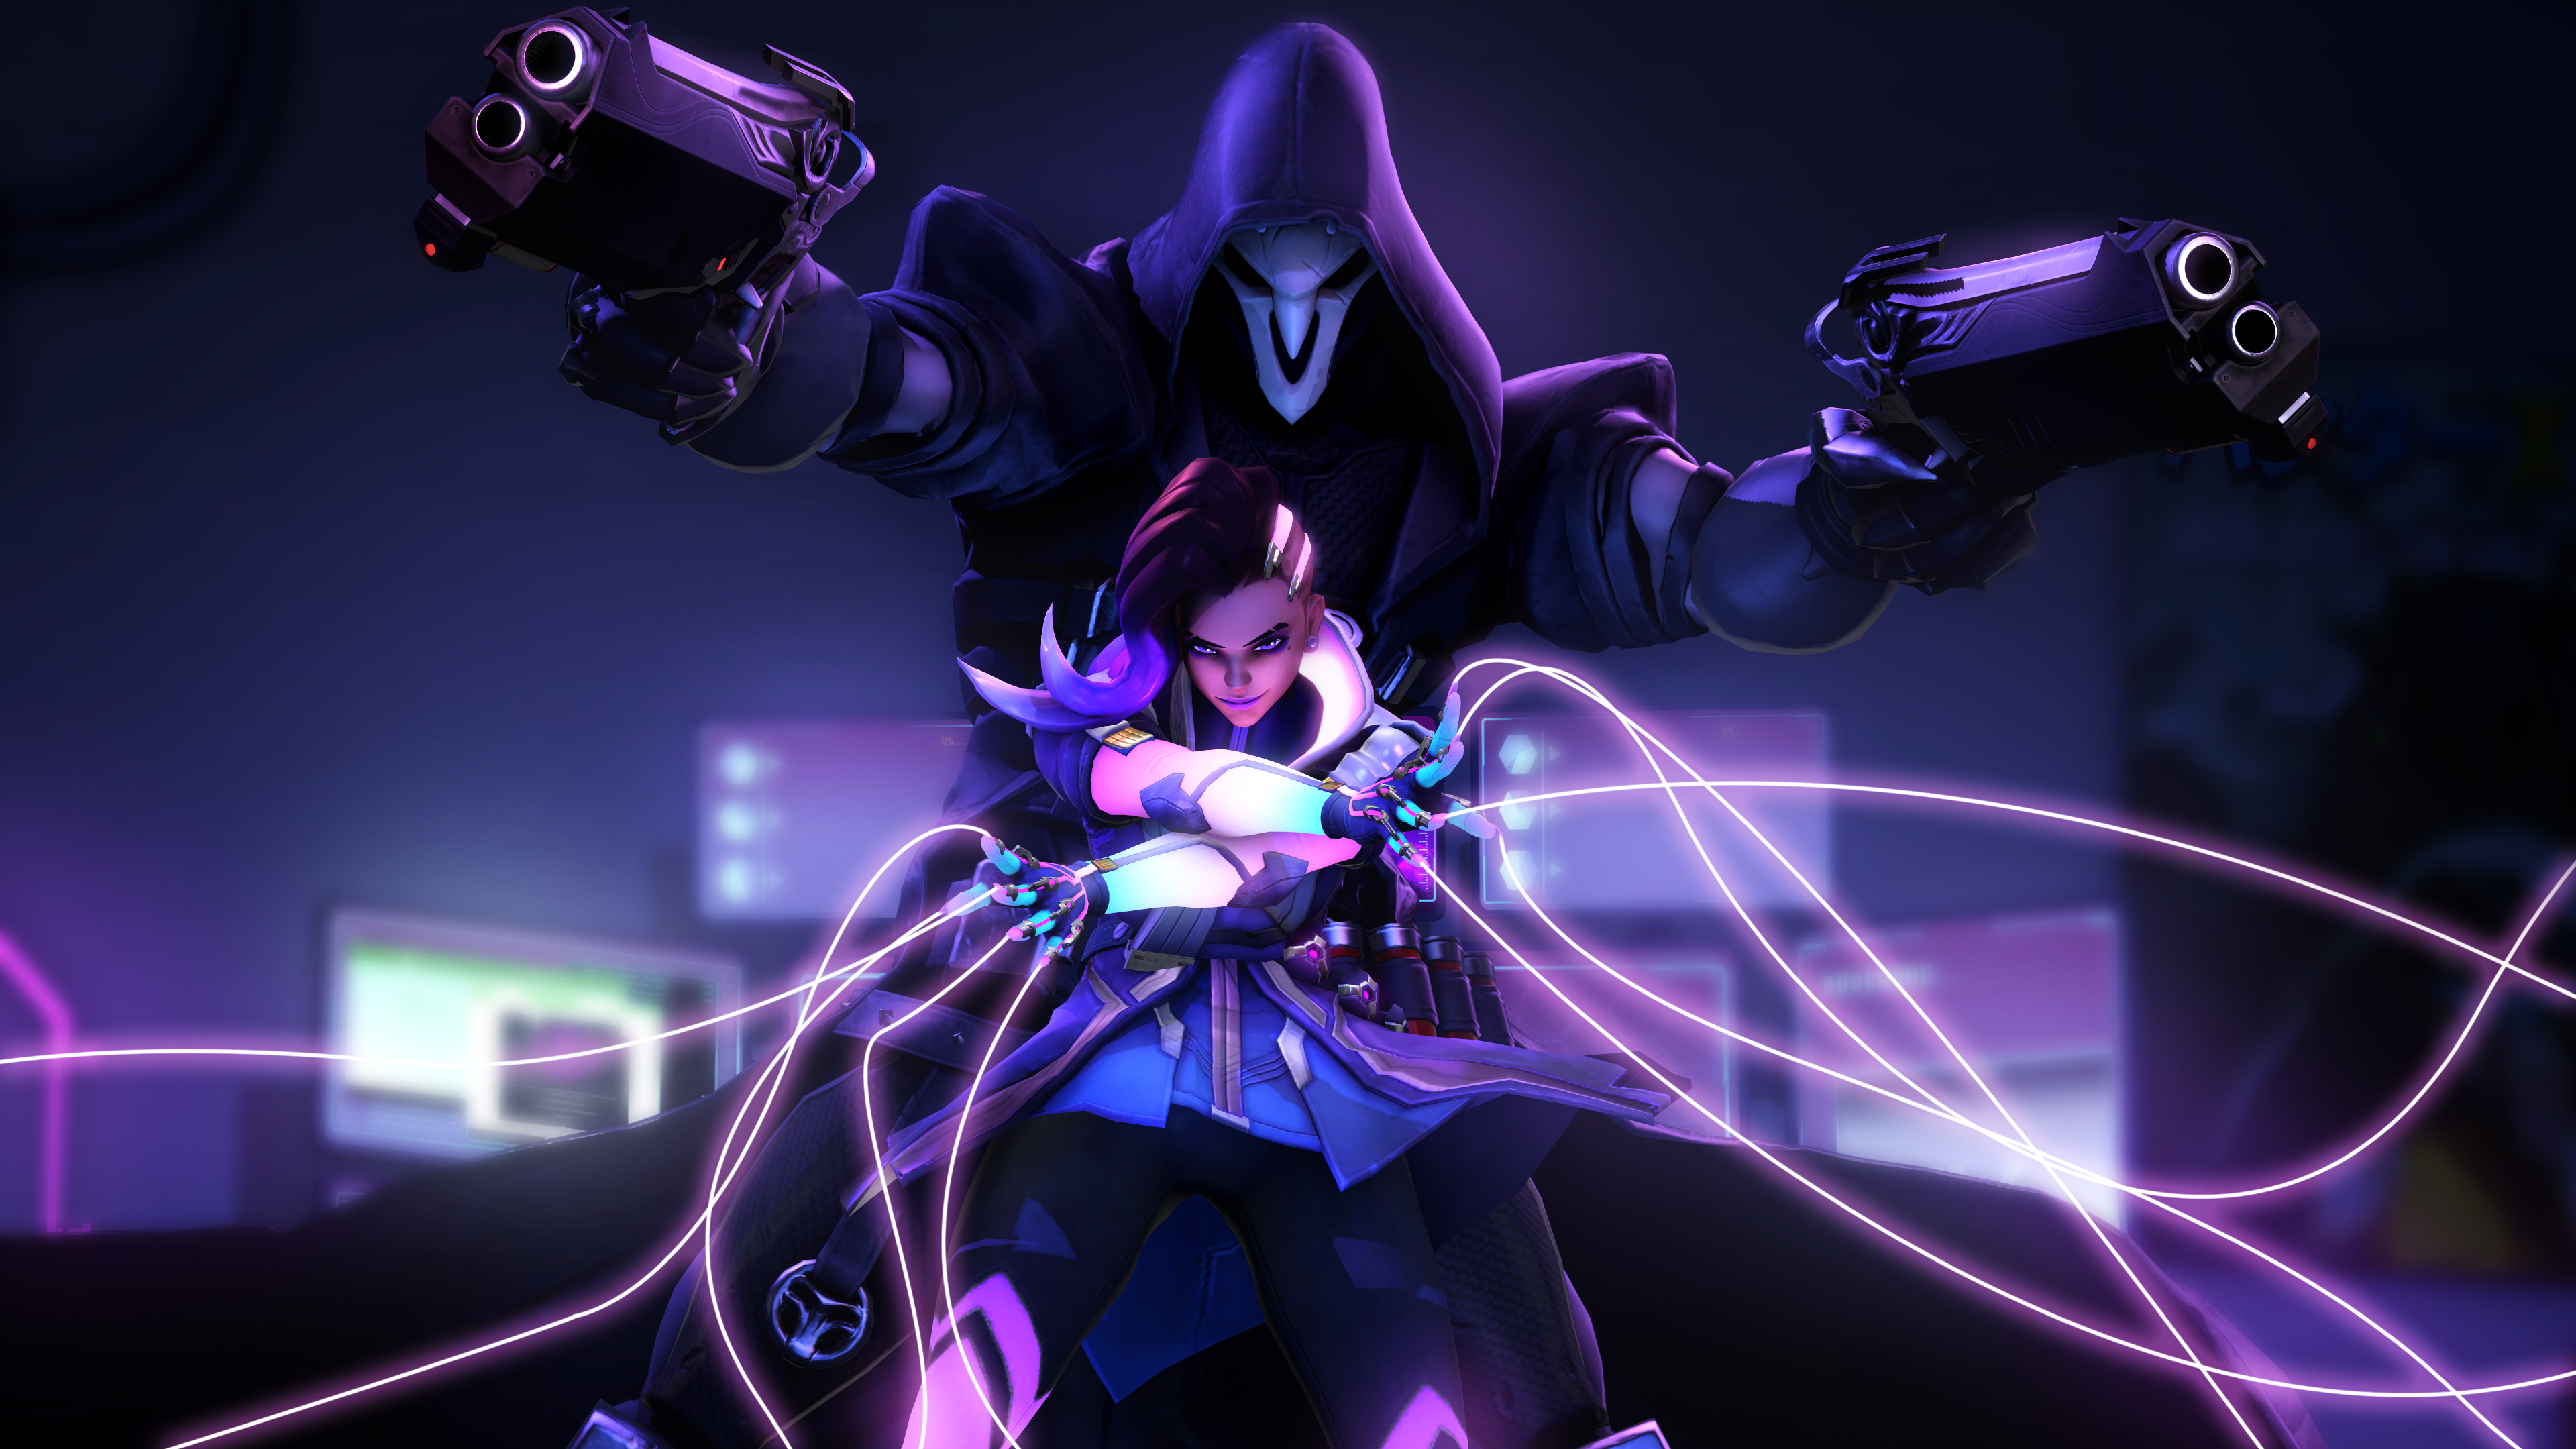 3840x21602021 Sombra Reaper Overwatch 4k 3840x21602021 Resolution Wallpaper,  HD Games 4K Wallpapers, Images, Photos and Background - Wallpapers Den